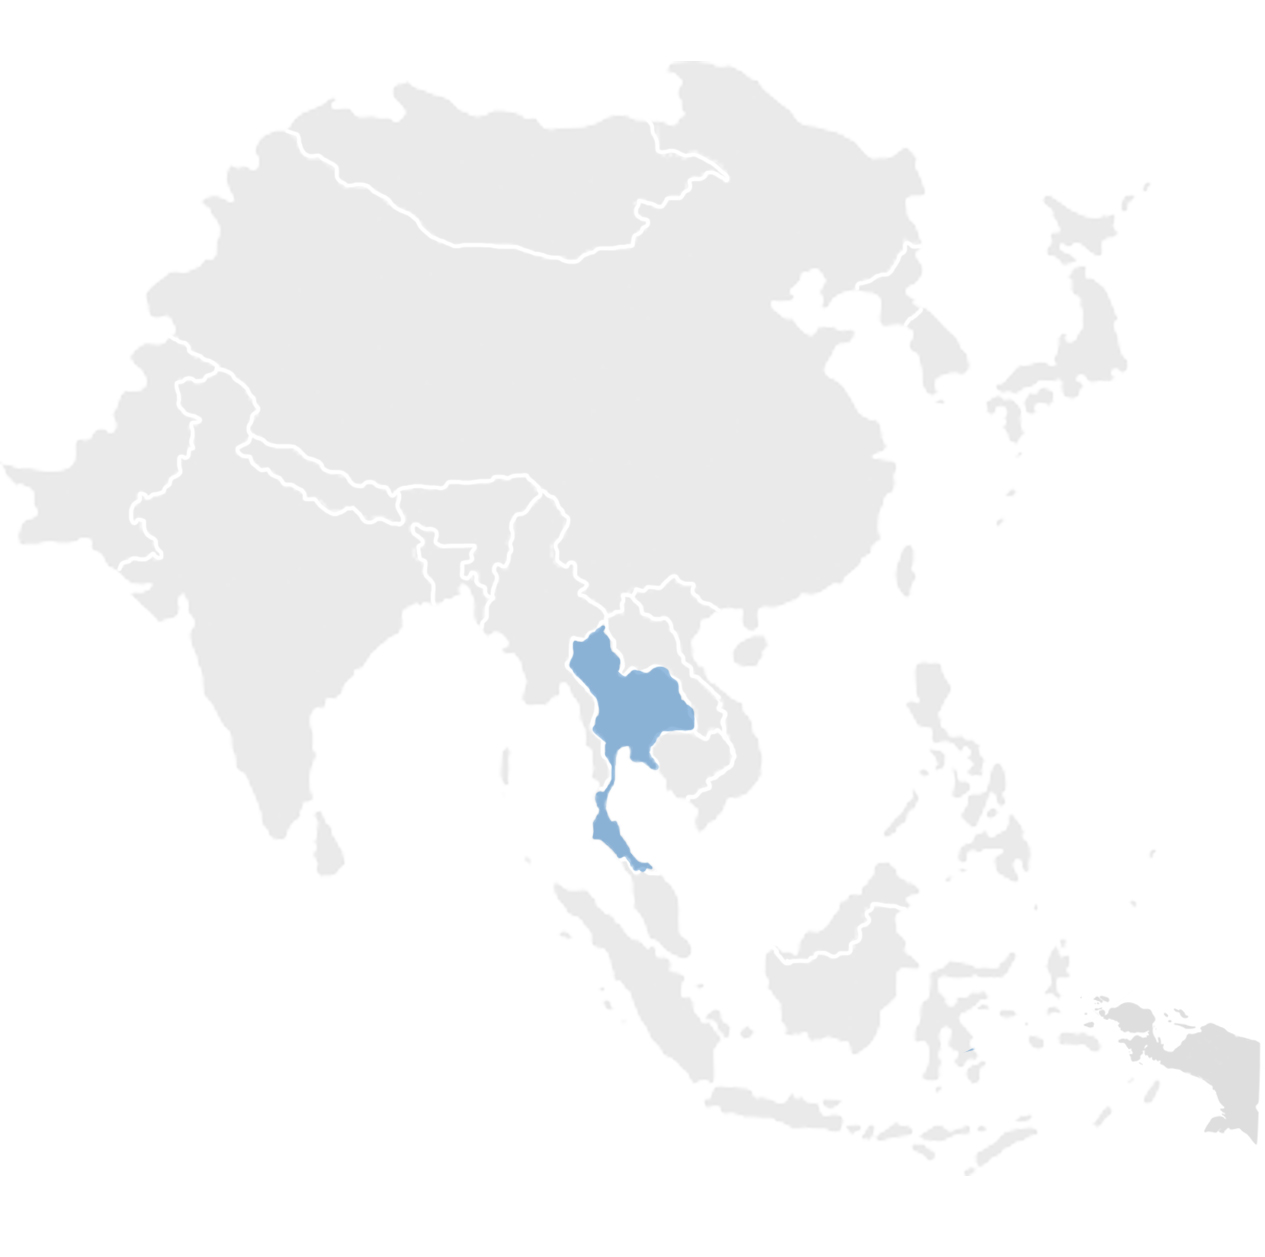 Gray map of Asia with Thailand in blue